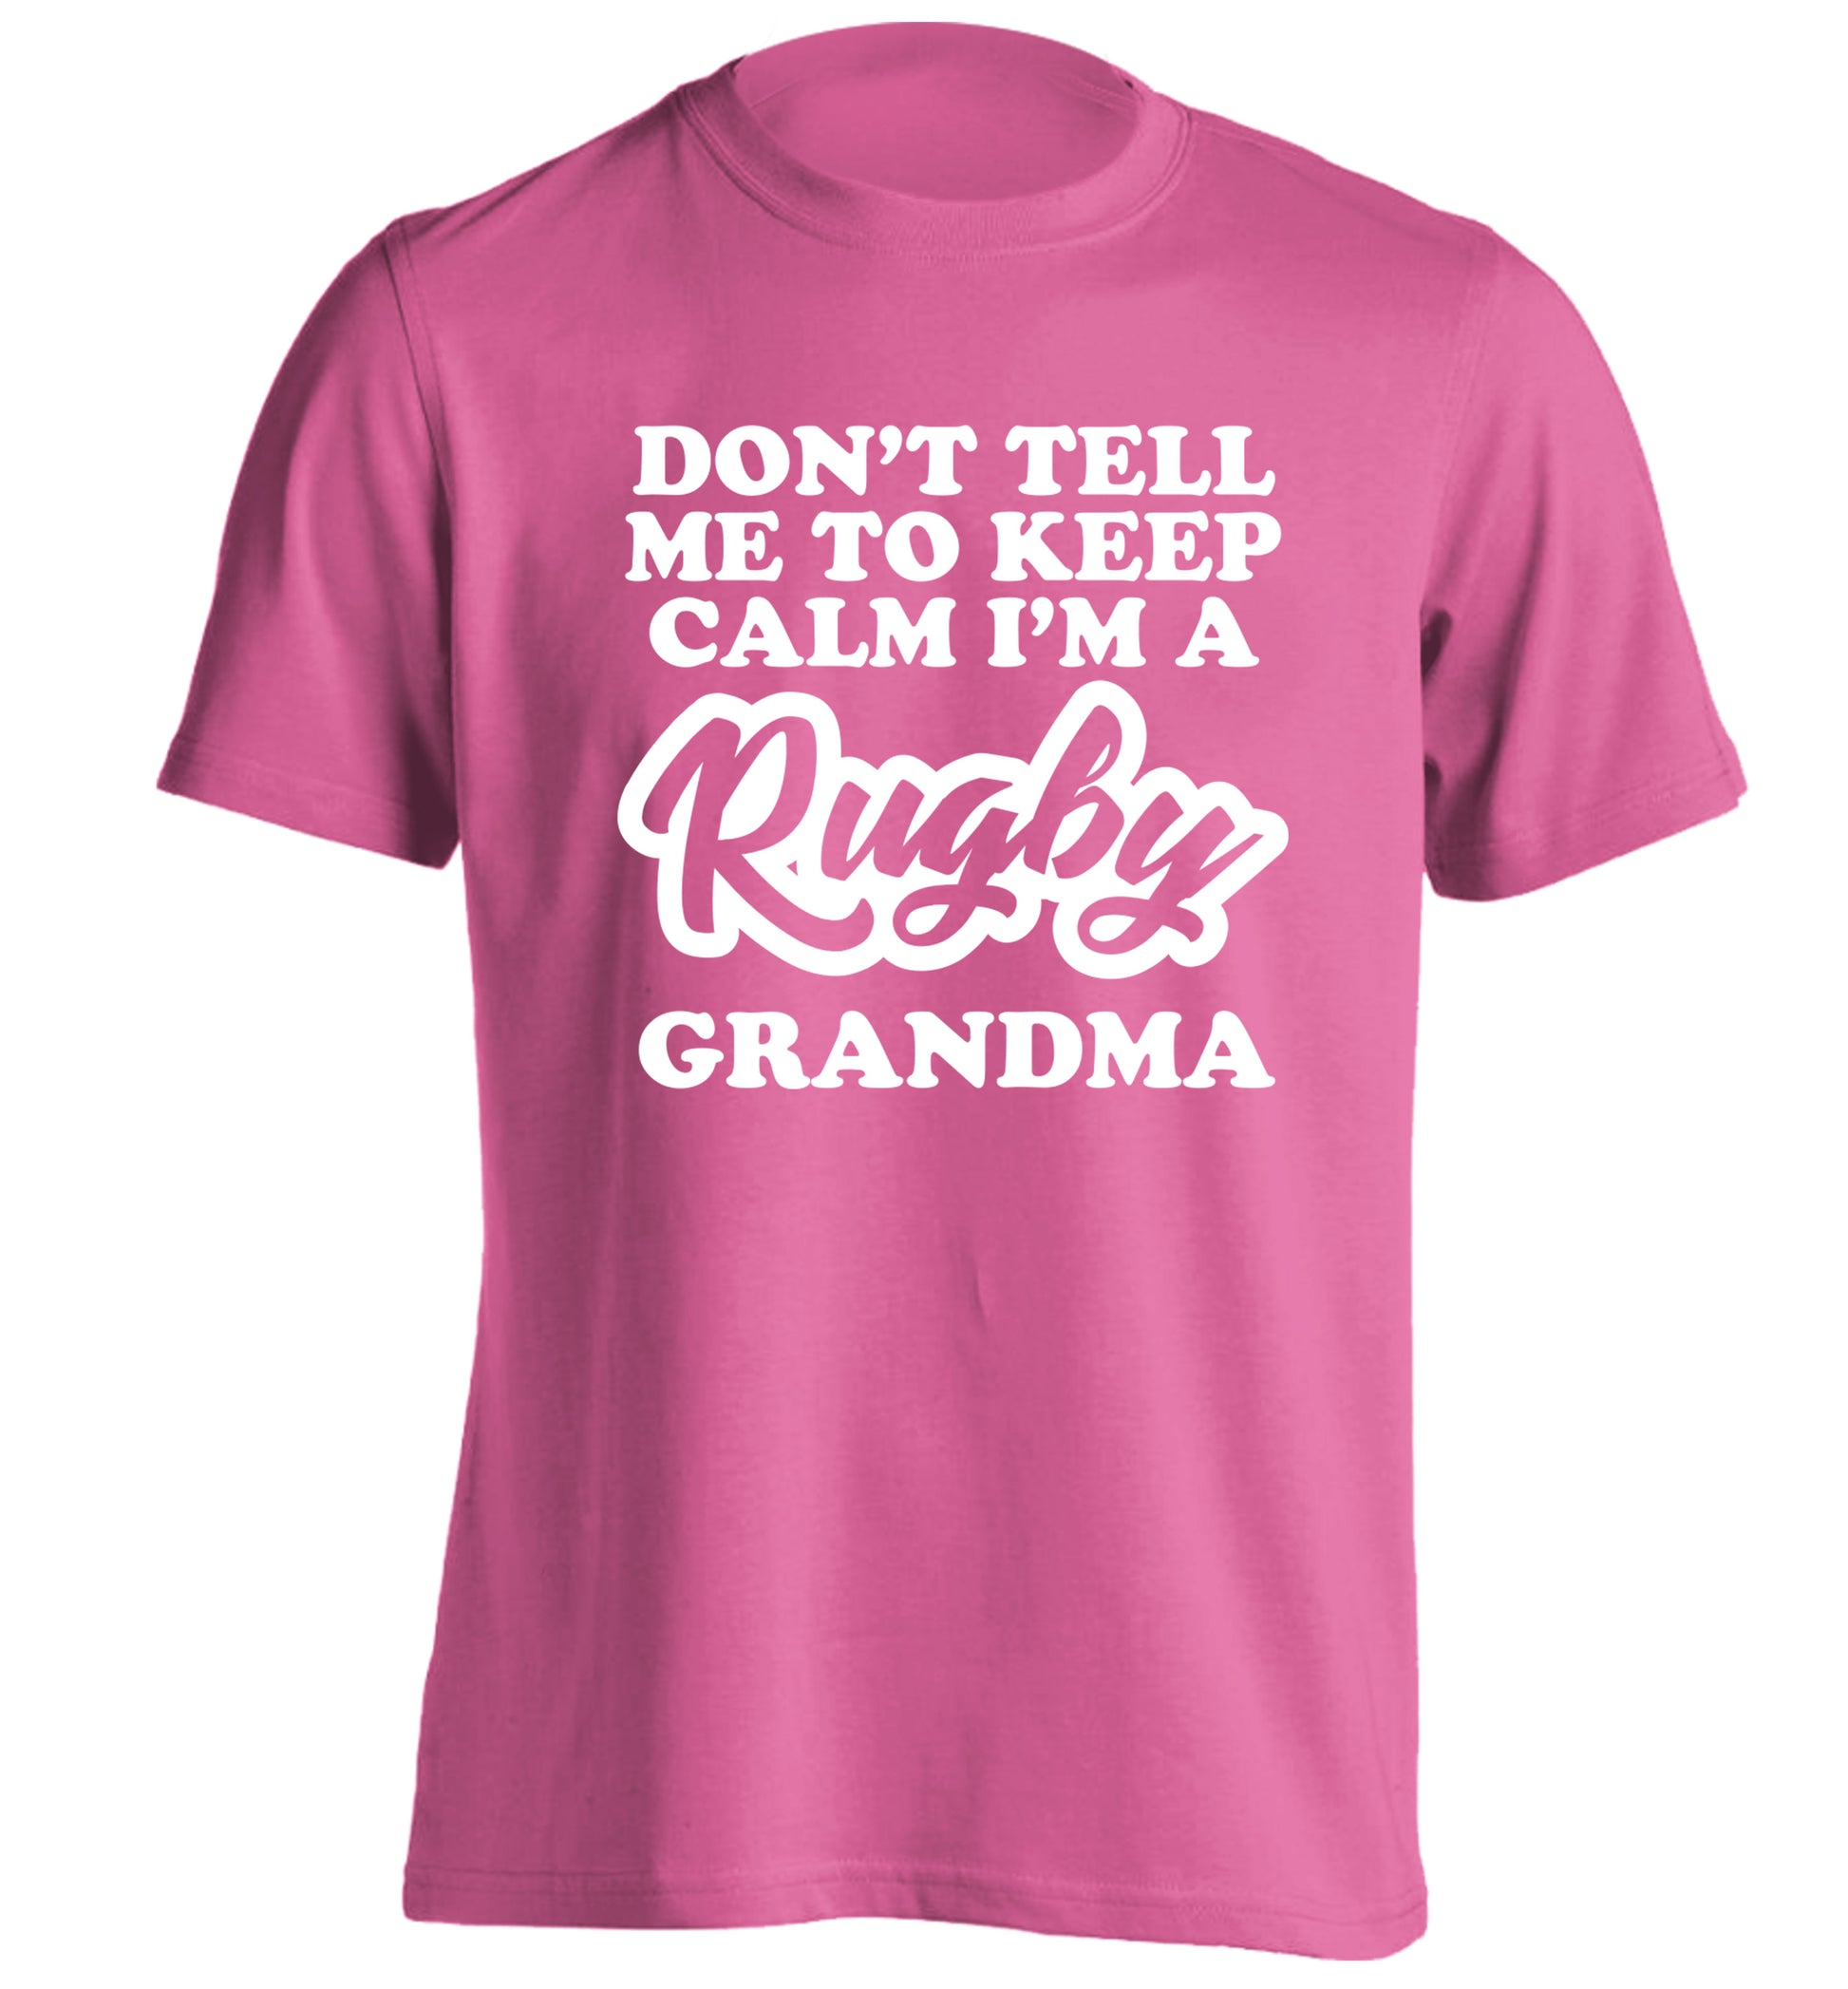 Don't tell me to keep calm I'm a rugby grandma adults unisex pink Tshirt 2XL